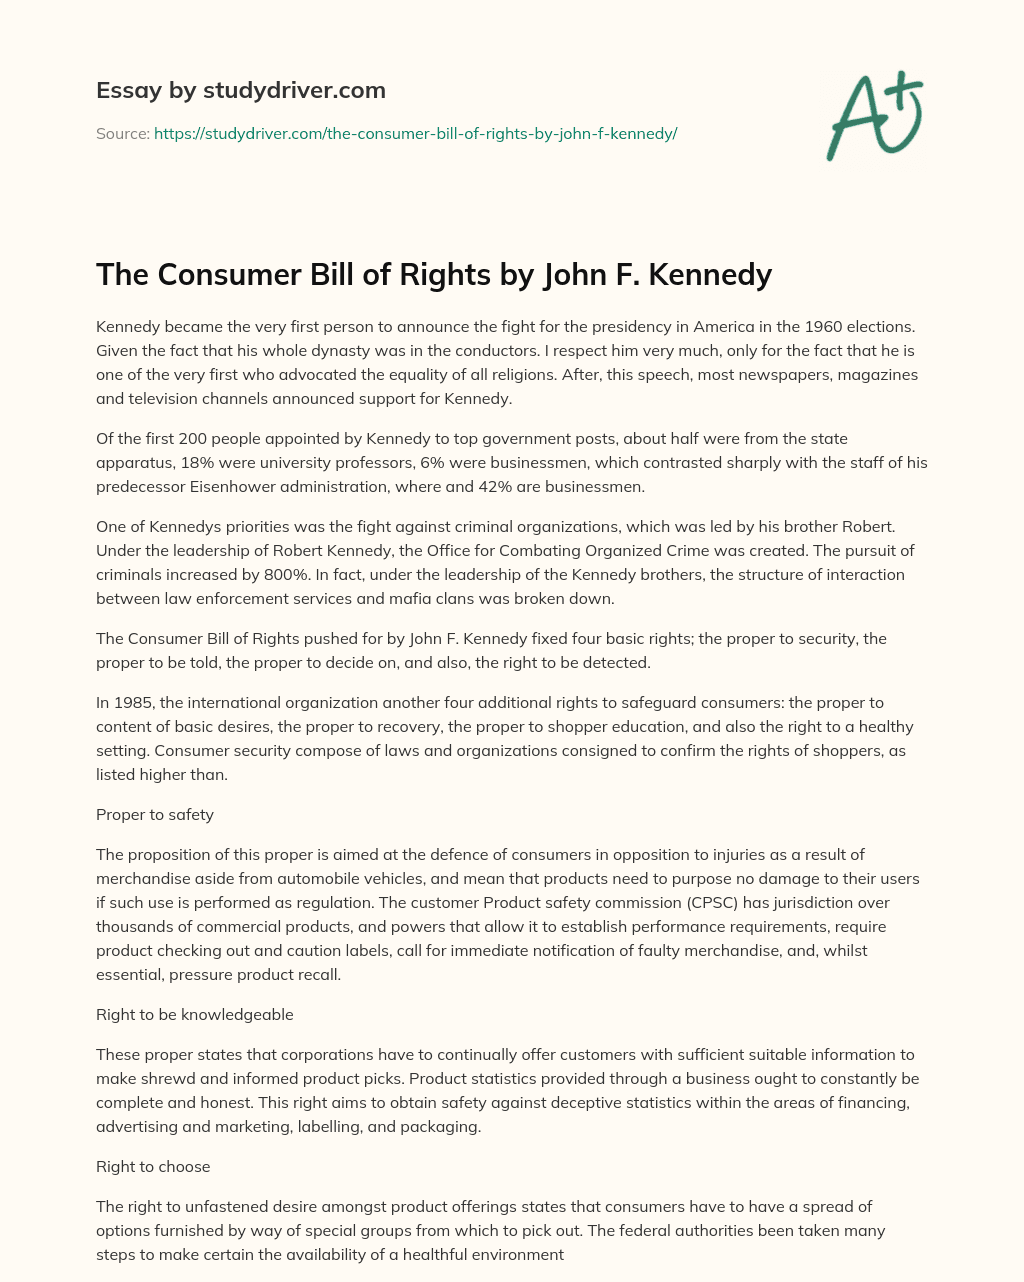 The Consumer Bill of Rights by John F. Kennedy essay